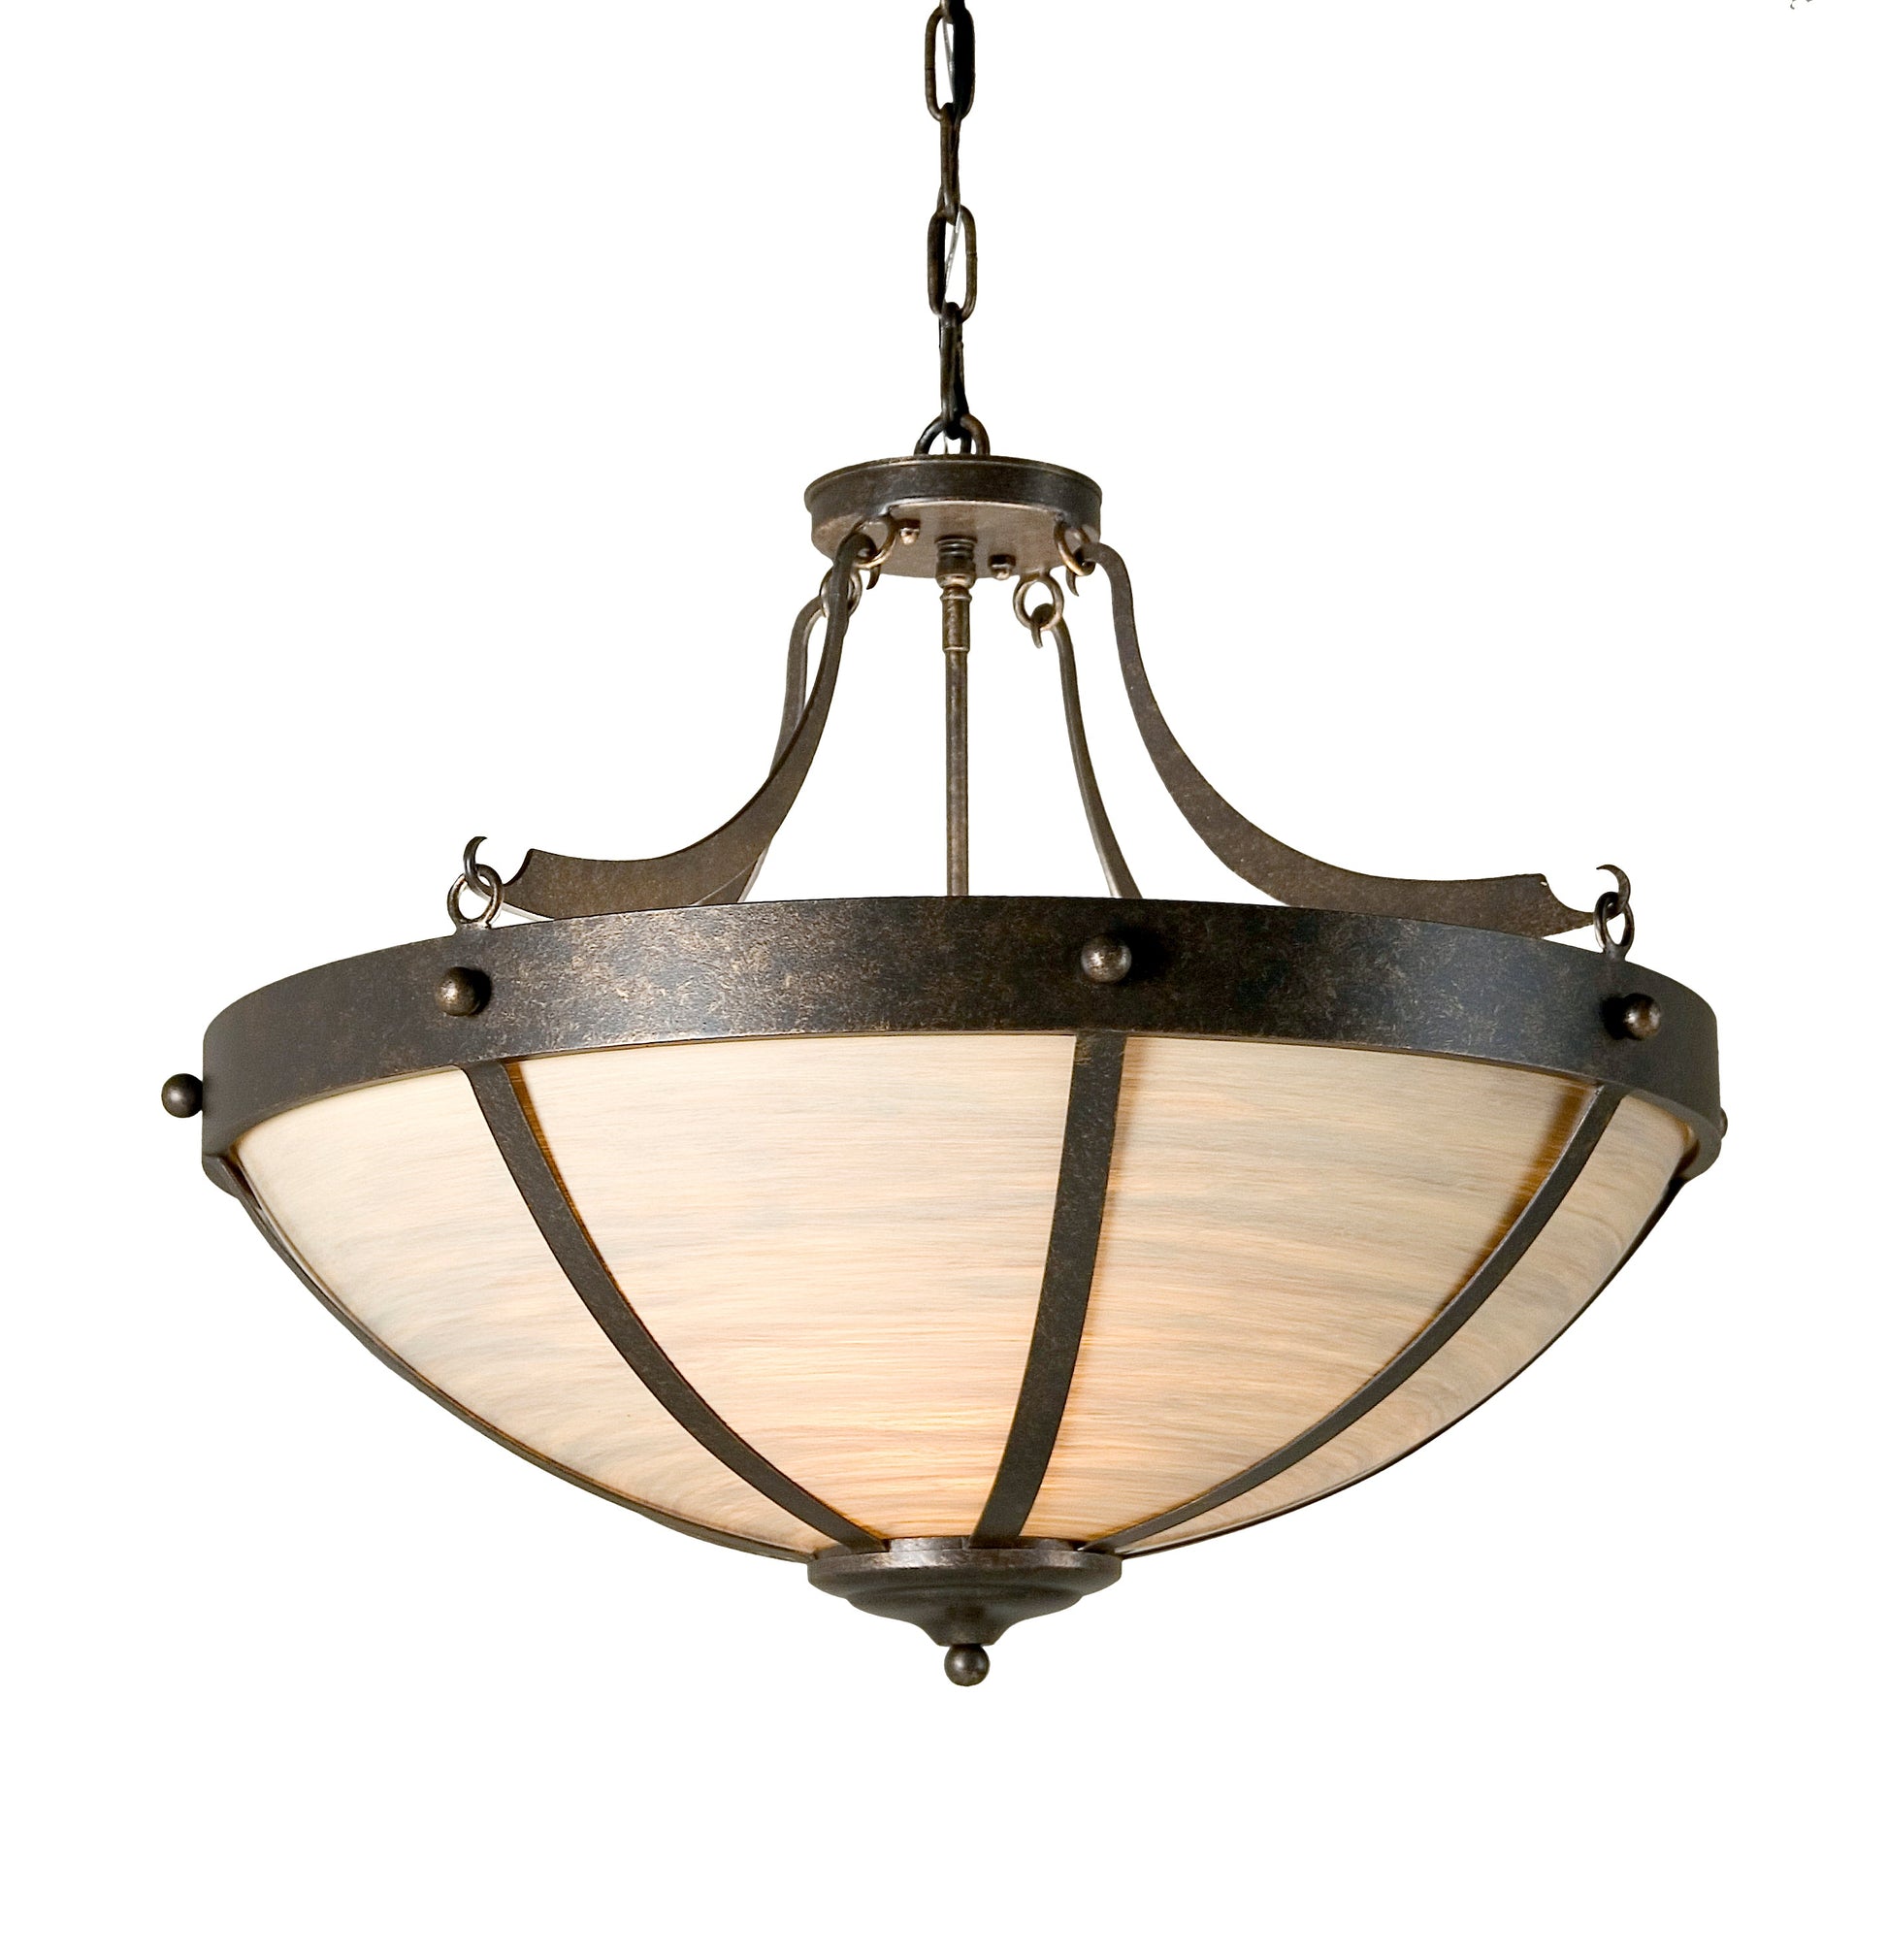 24" Isadore Inverted Pendant by 2nd Ave Lighting